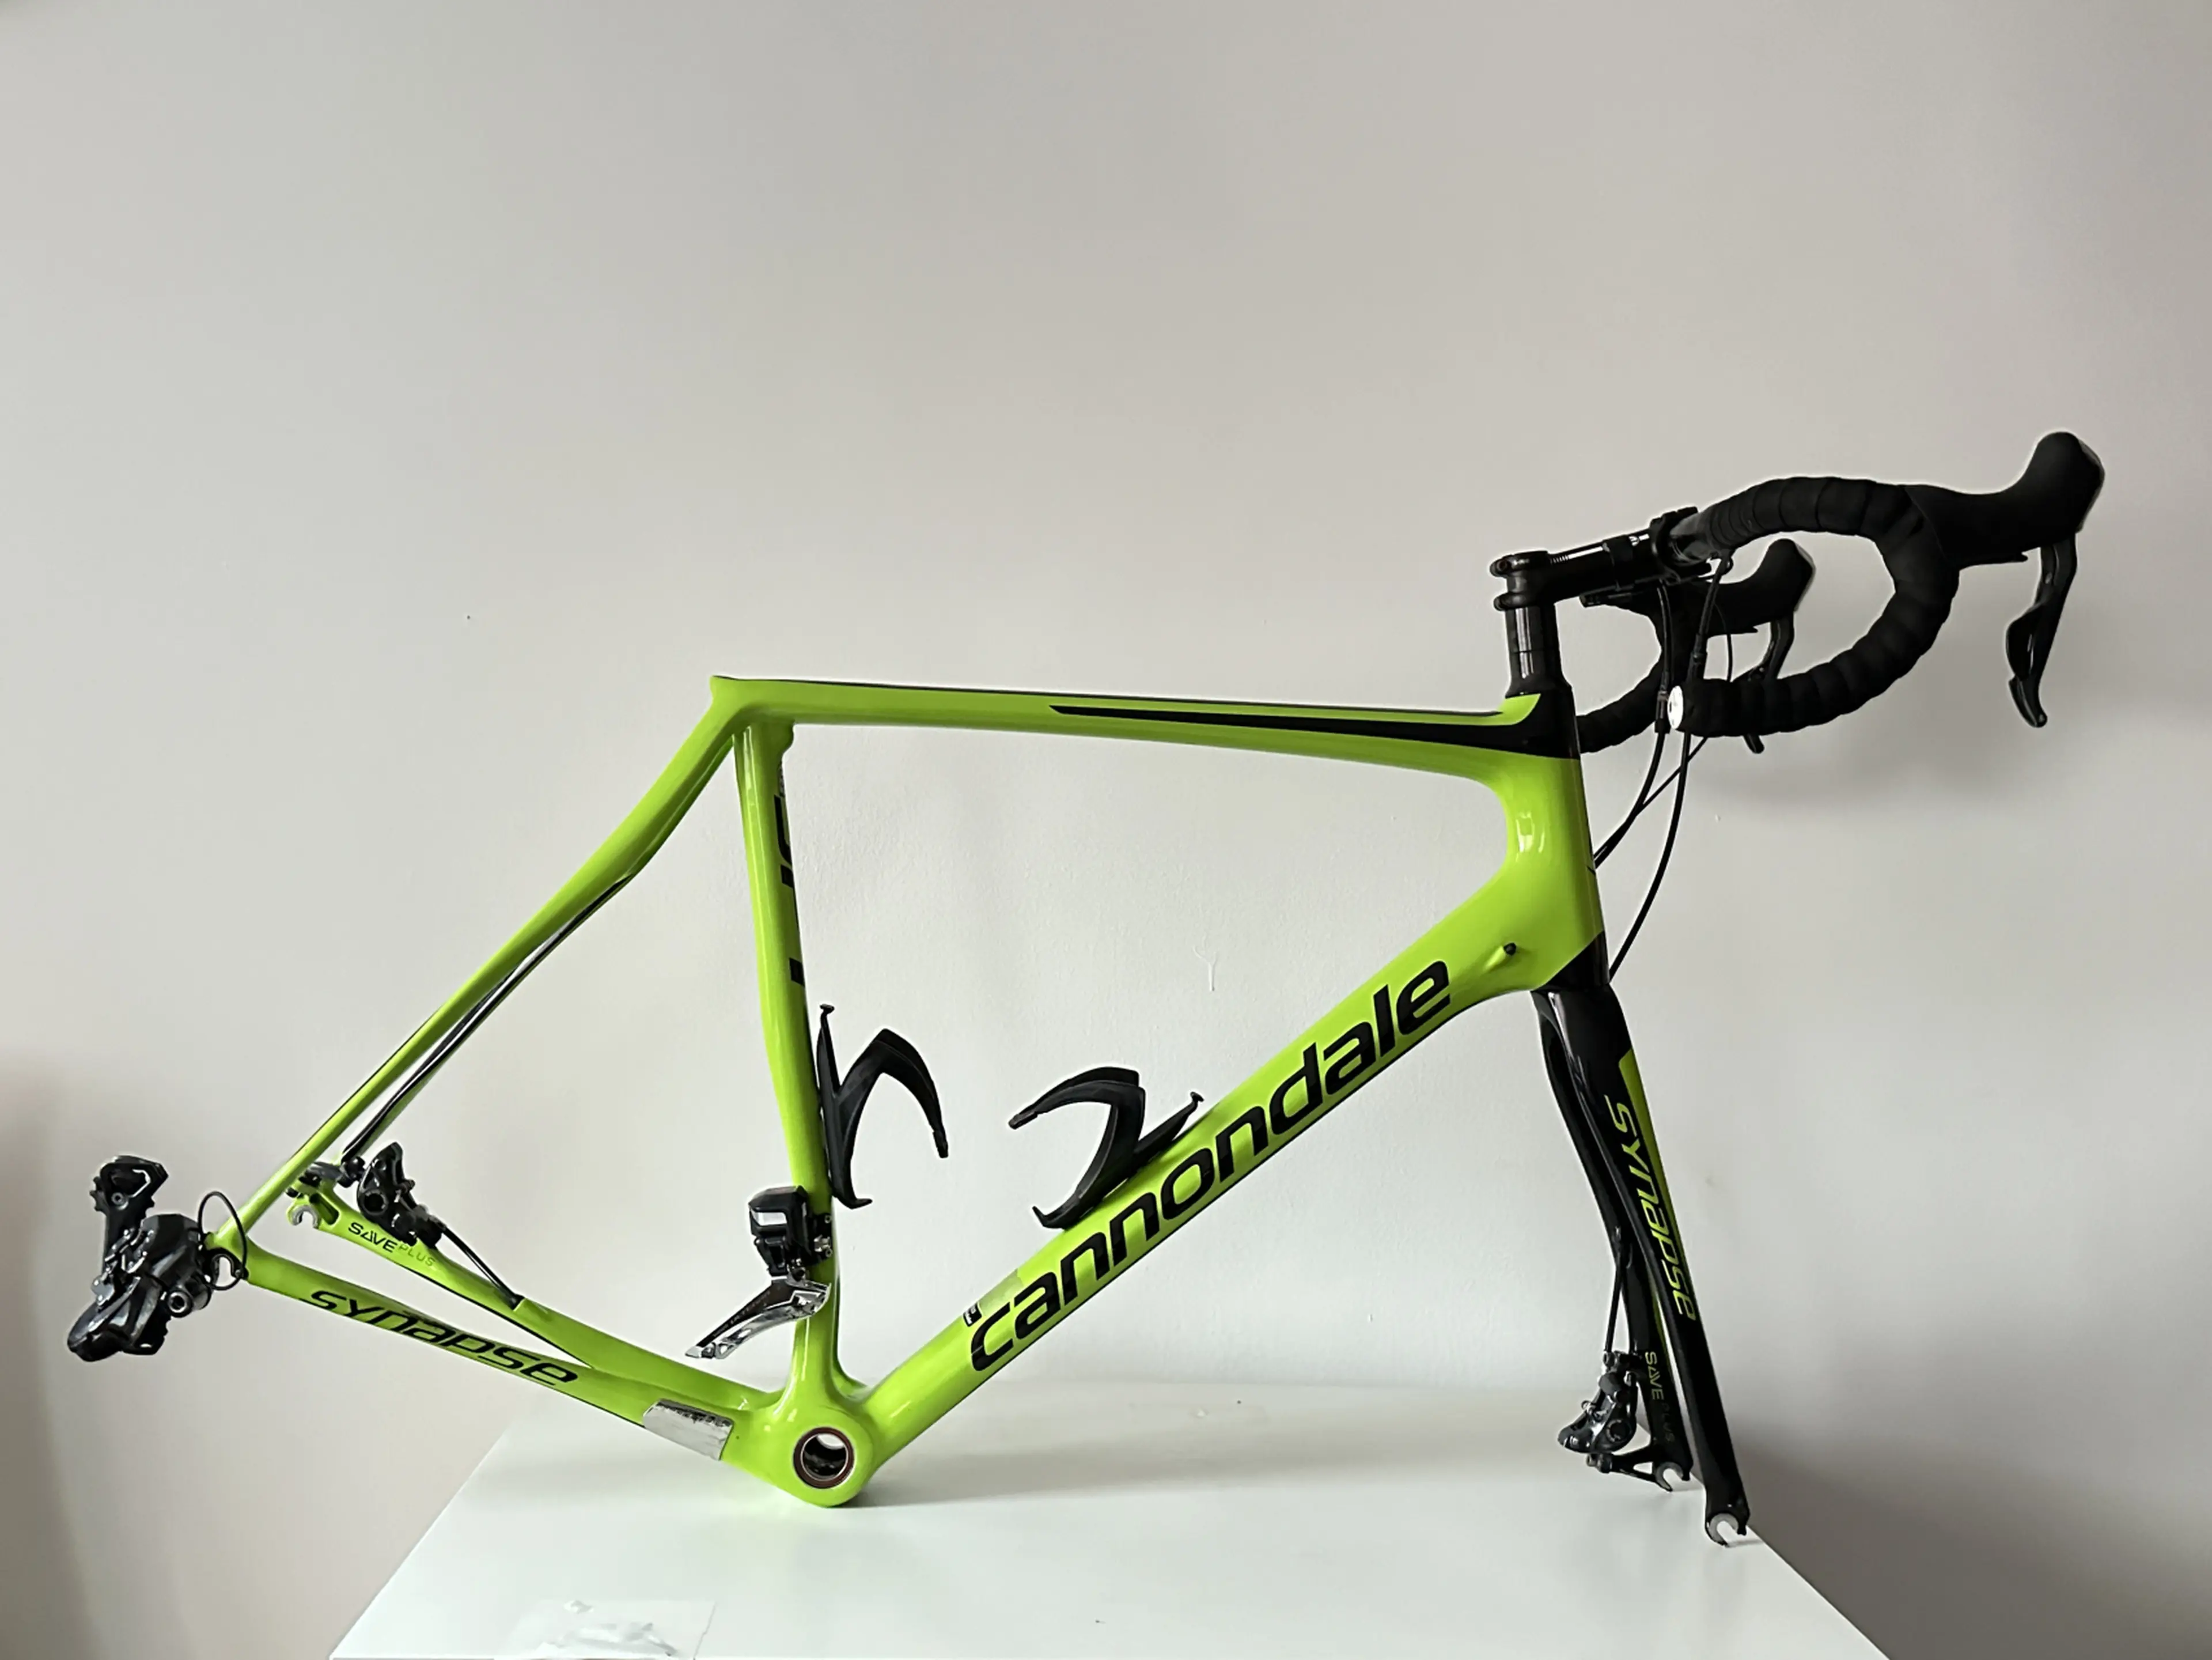 2. Cannondale Synapse Disc + Ultregra Di2 groupset